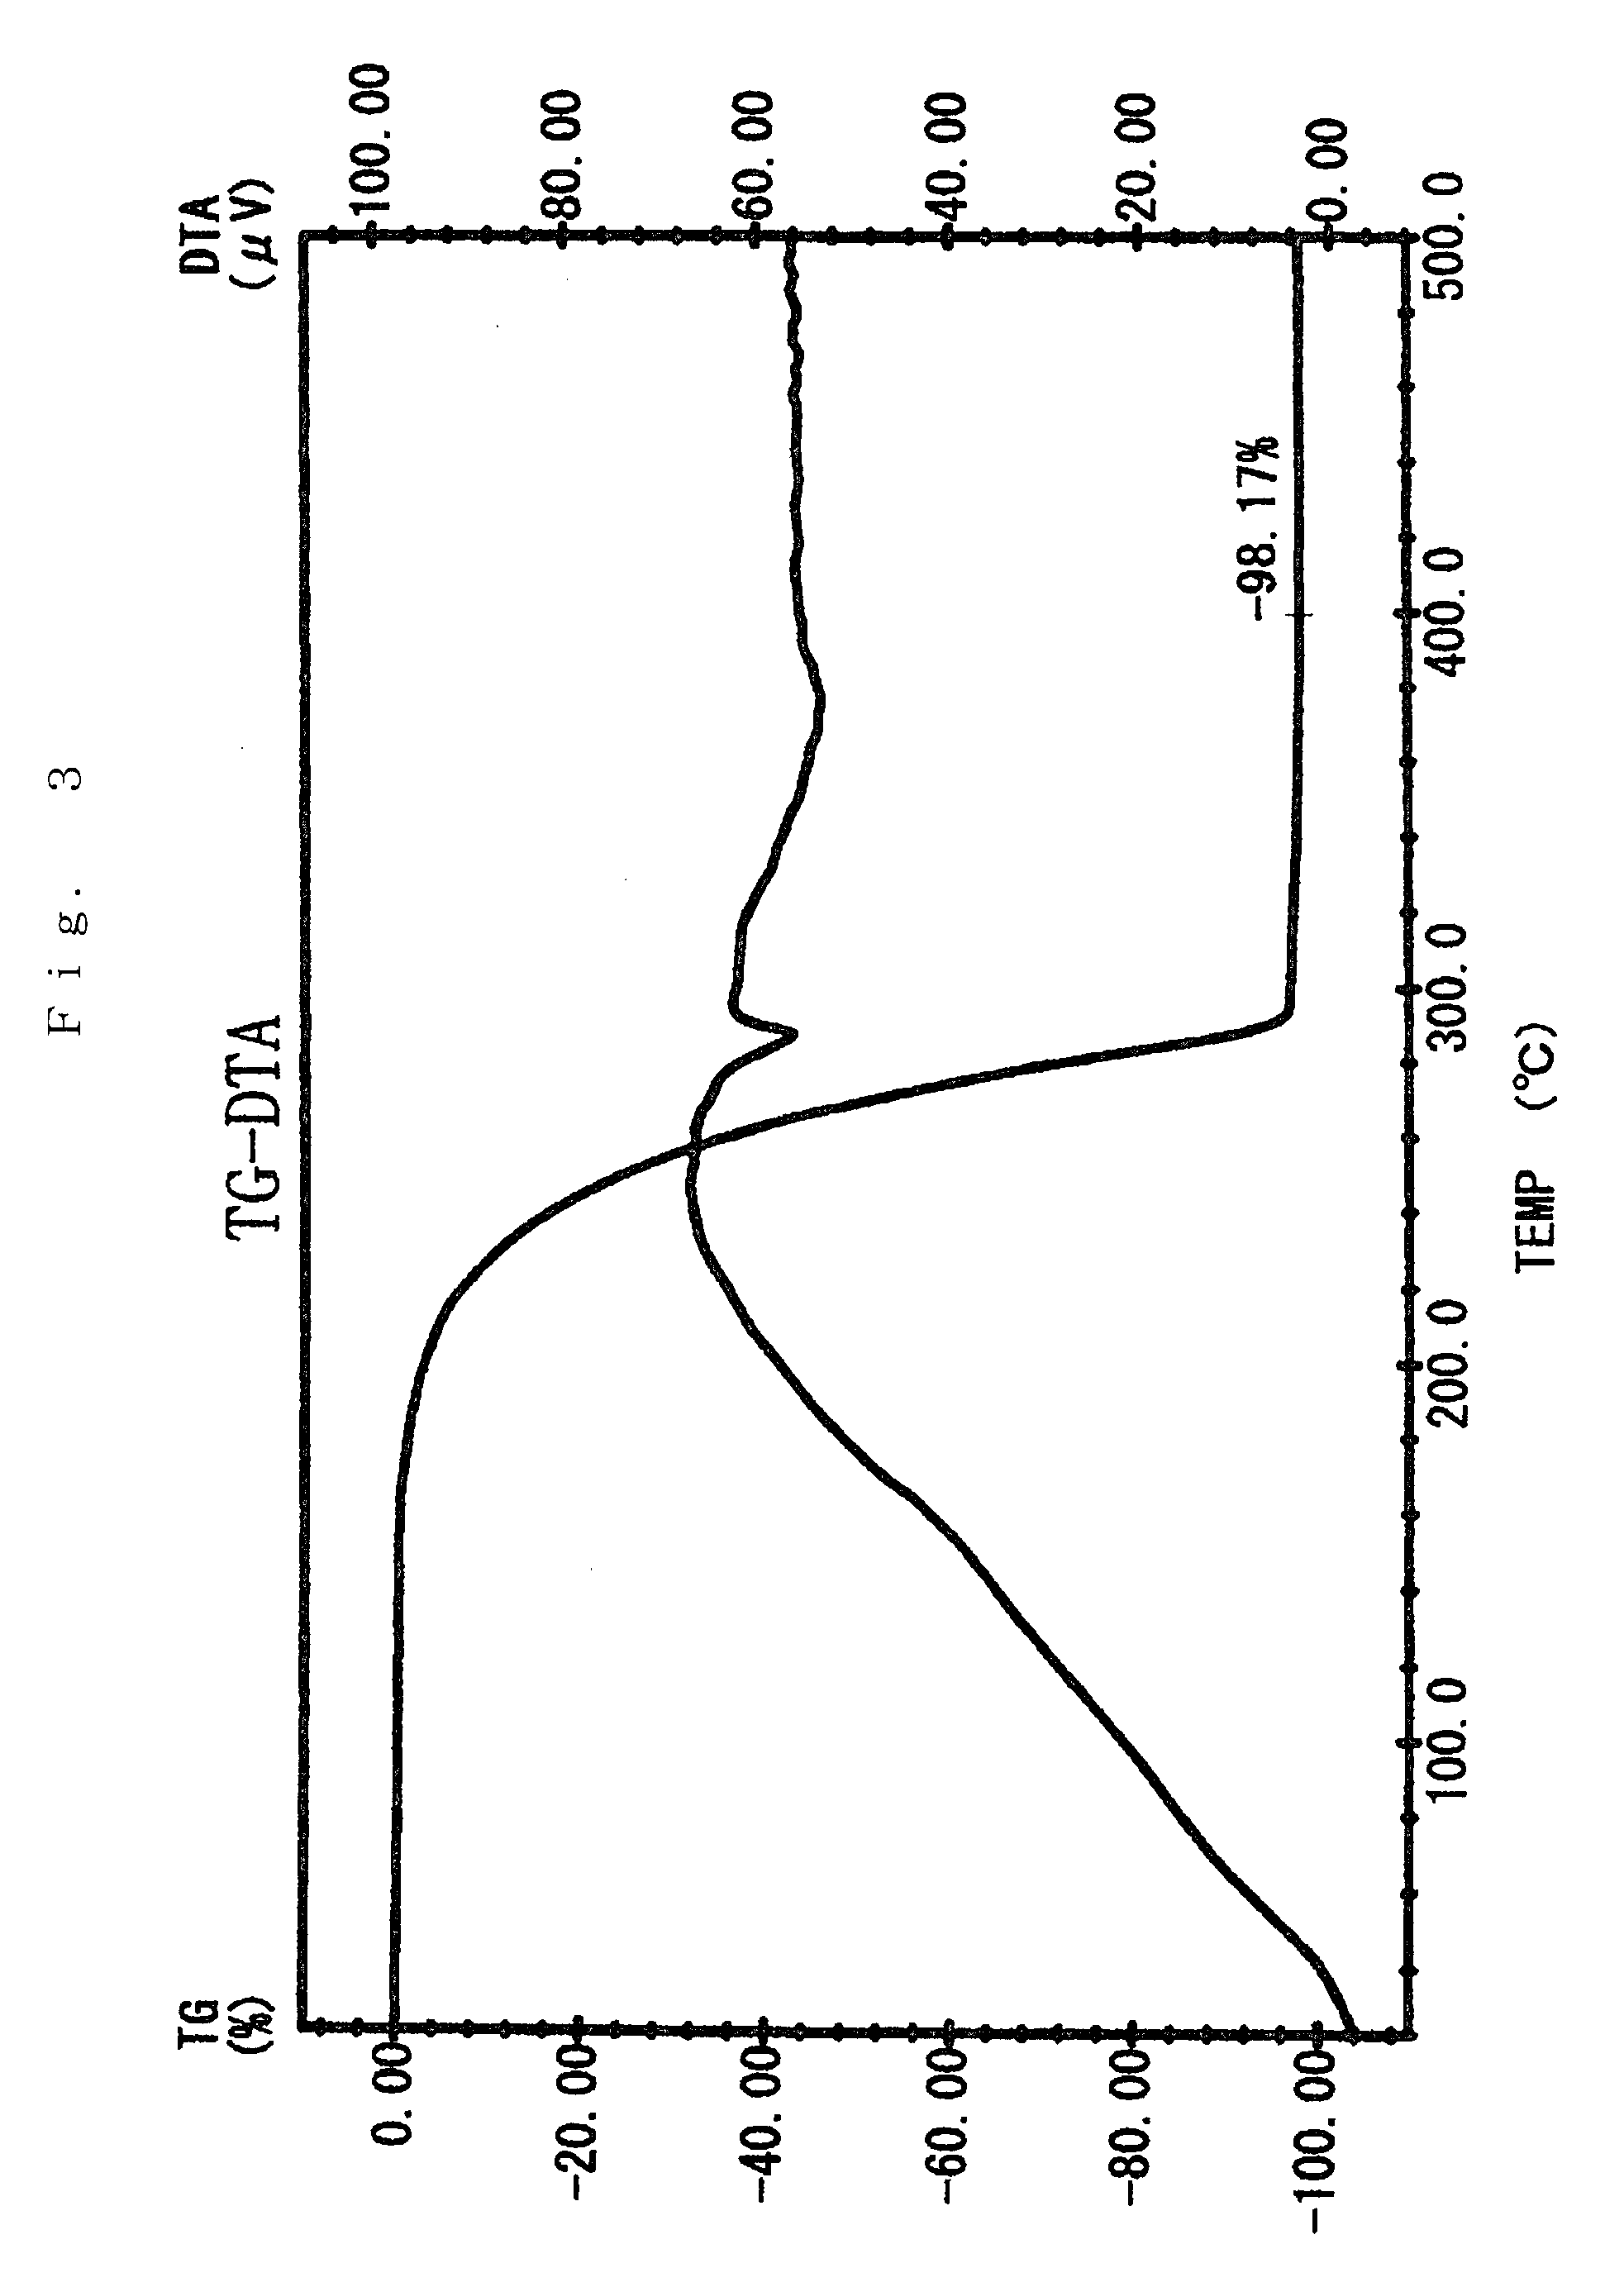 Raw material for forming a strontium-containing thin film and process for preparing the raw material